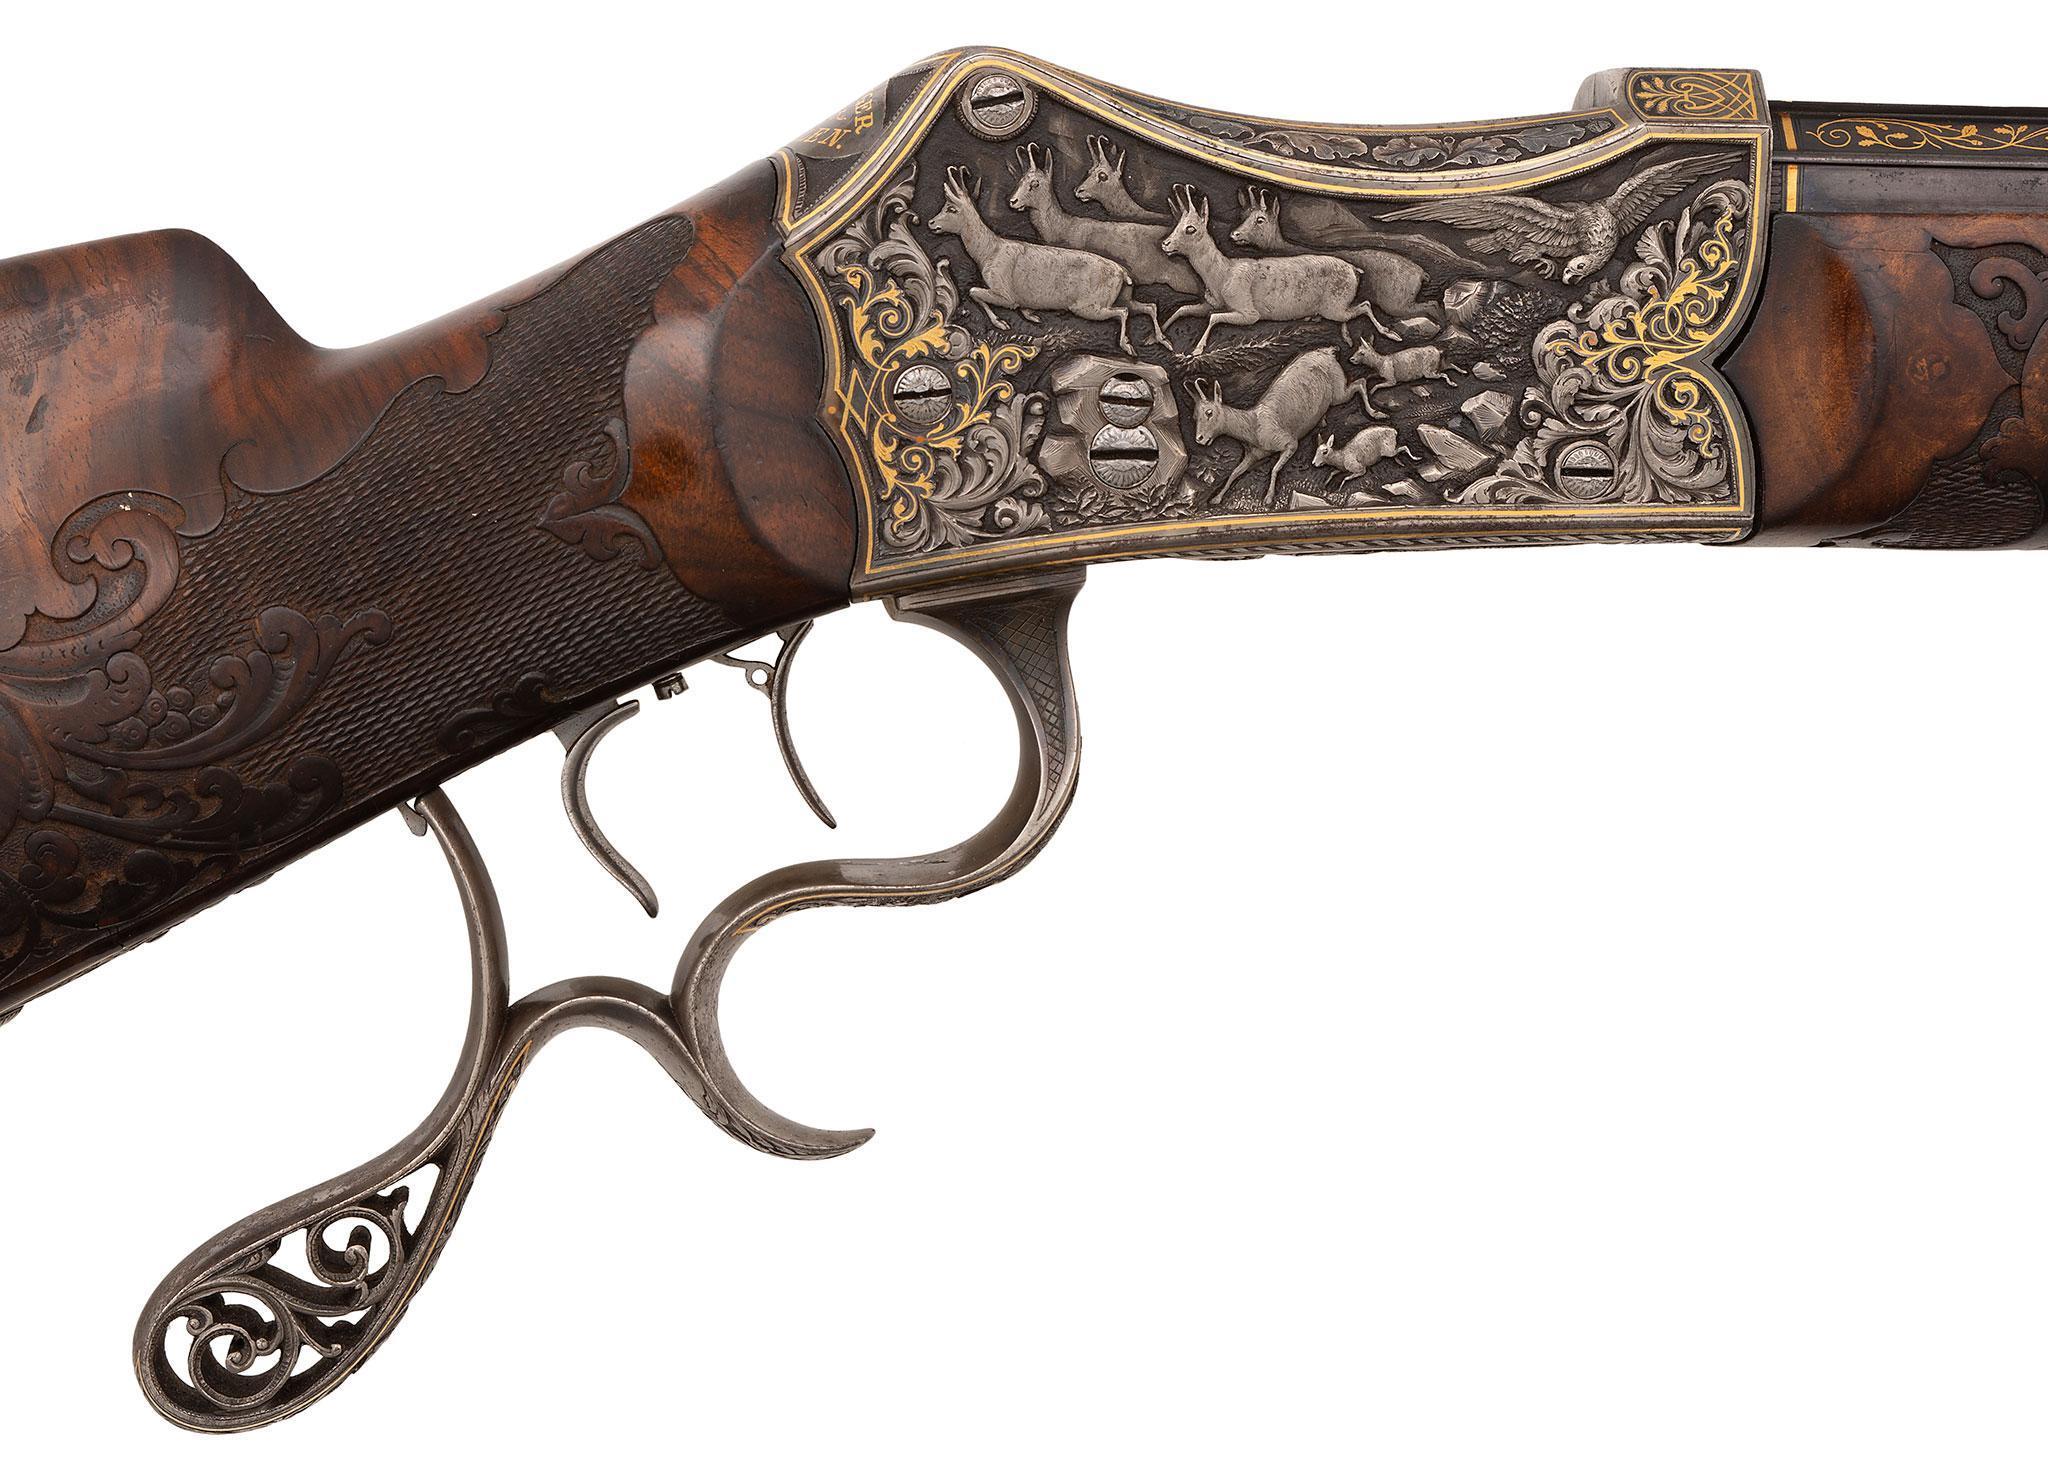 Magnificent Martini Action Relief Chiseled & Profusely Gold Inlaid Schuetzen Rifle Made In Germany